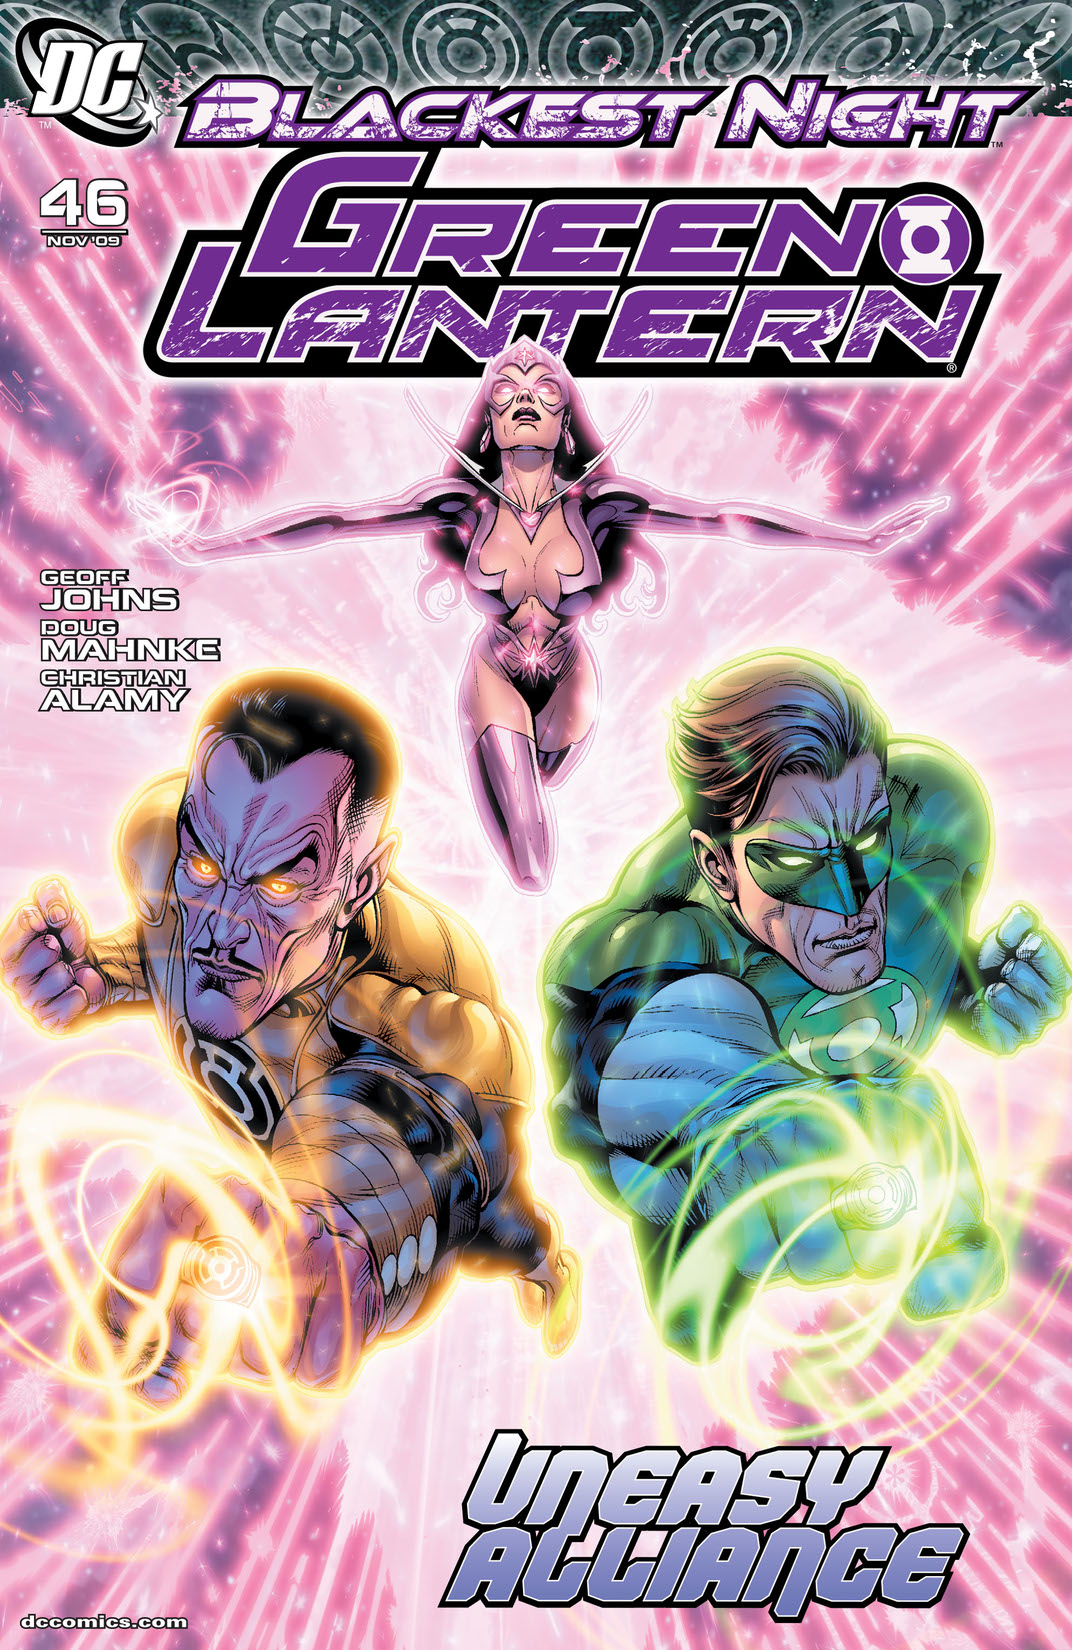 Green Lantern (2005-) #46 preview images